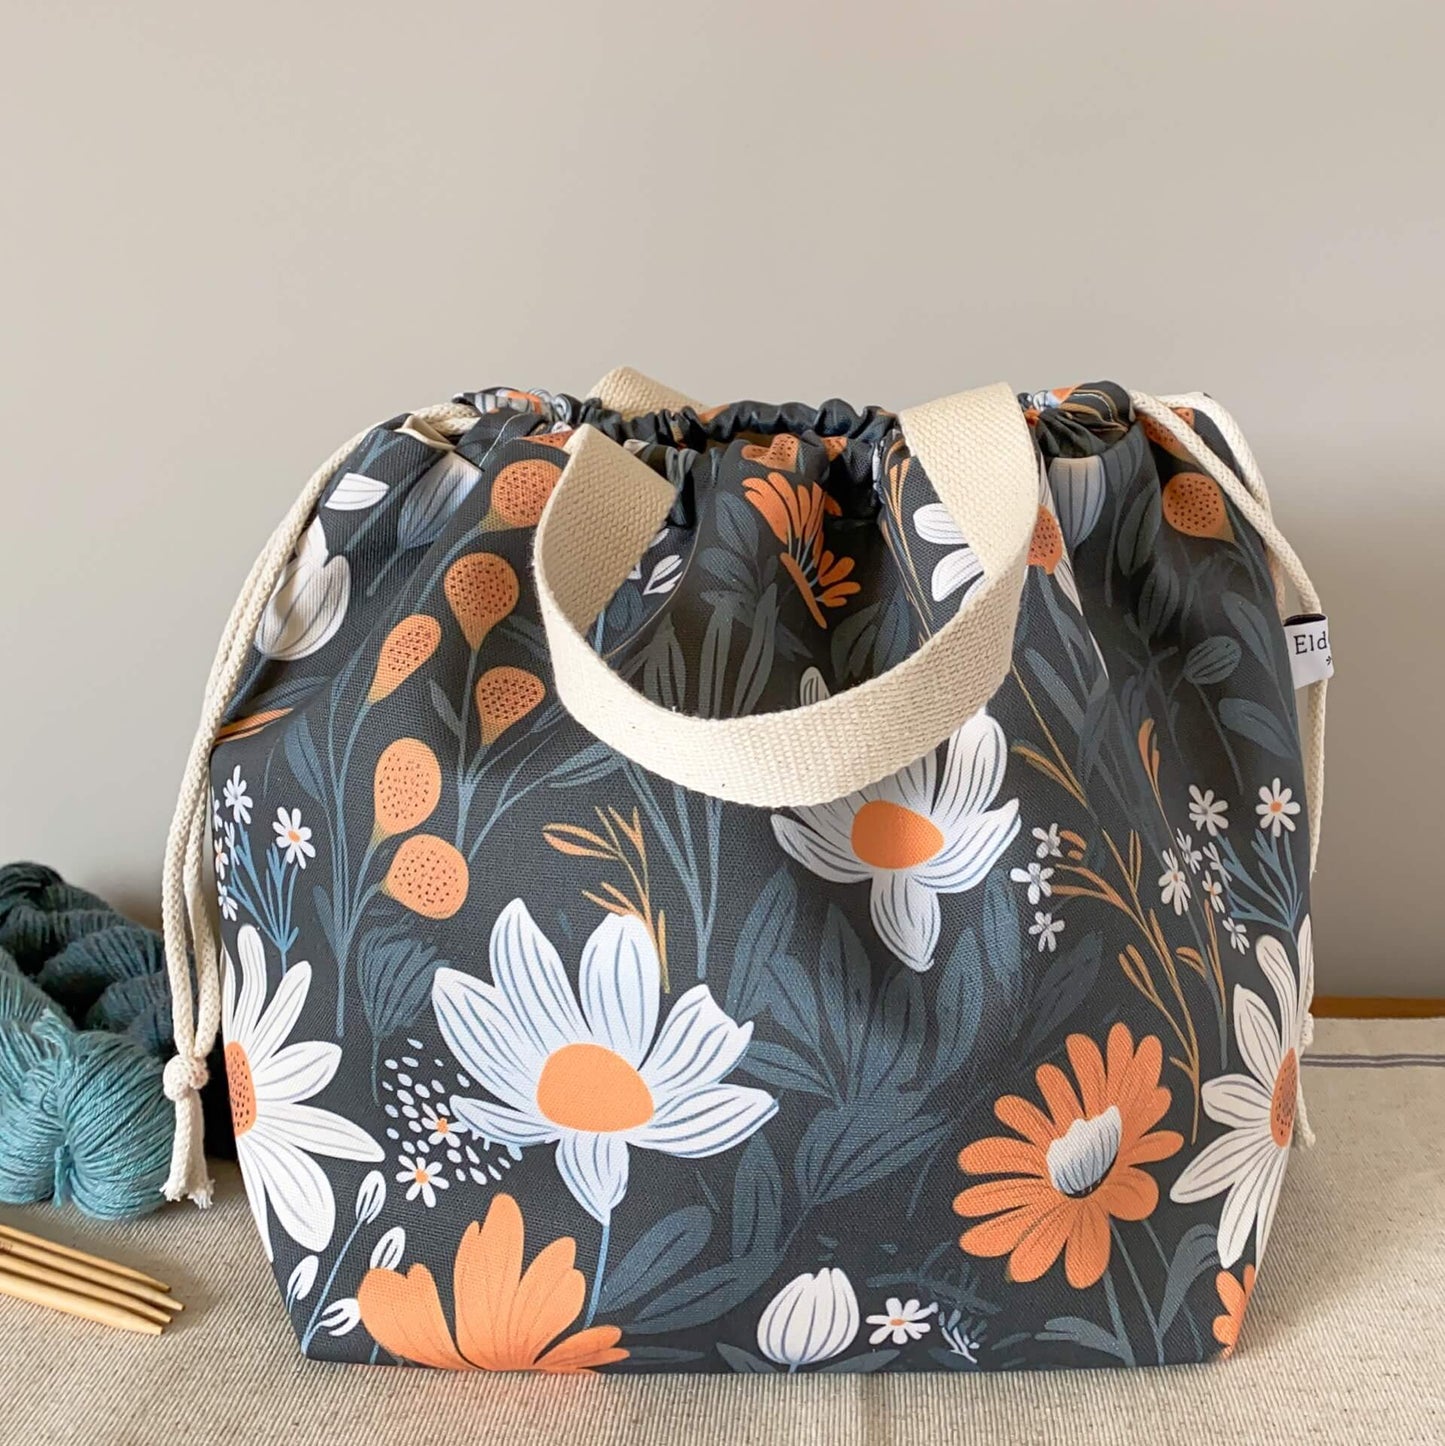 A knitting project bag featuring a bold floral printed fabric sits on a wooden table. It is pulled closed by drawstrings hiding the contents of the bag. 